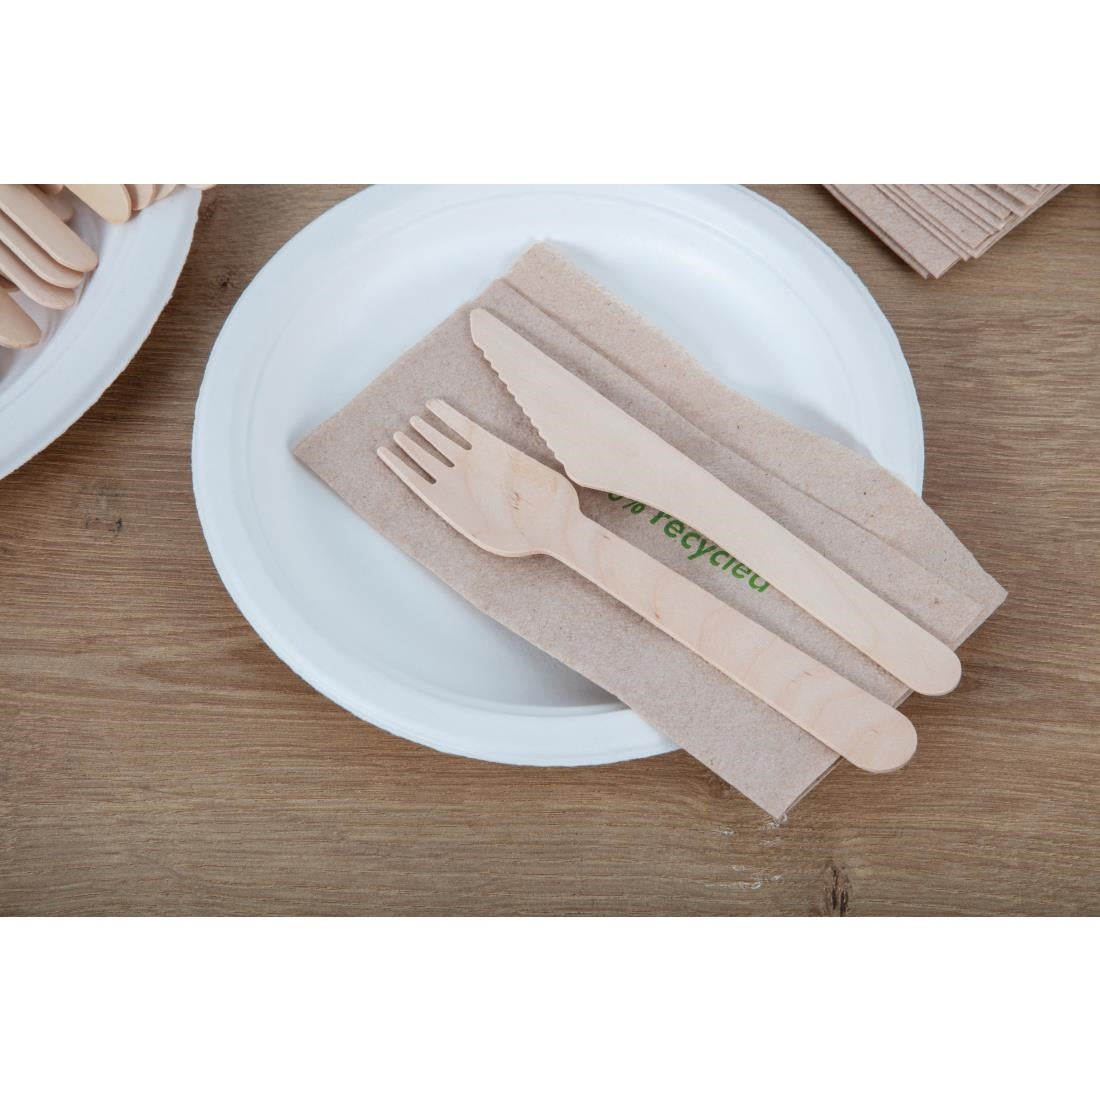 Fiesta Green Biodegradable Disposable Wooden Forks (Pack of 100) JD Catering Equipment Solutions Ltd